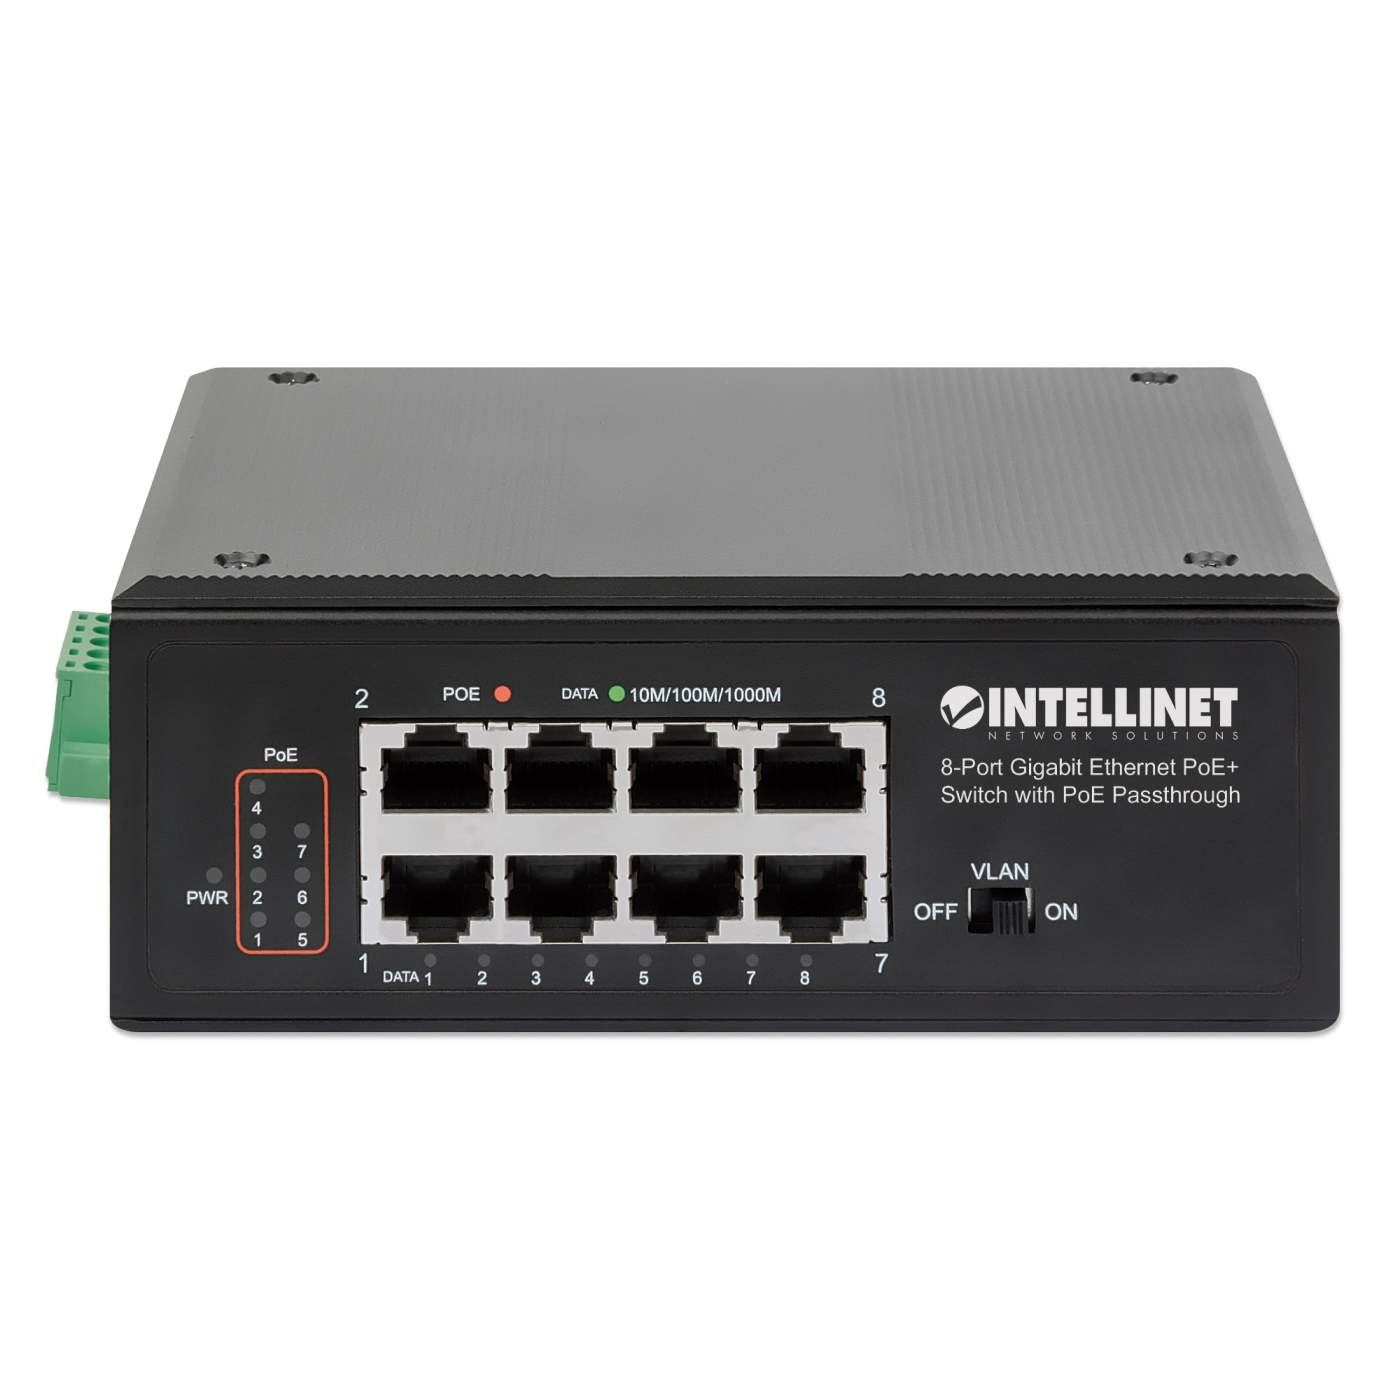 PoE-Powered 8-Port Gigabit Ethernet PoE+ Industrial Switch with PoE Passthrough Image 4